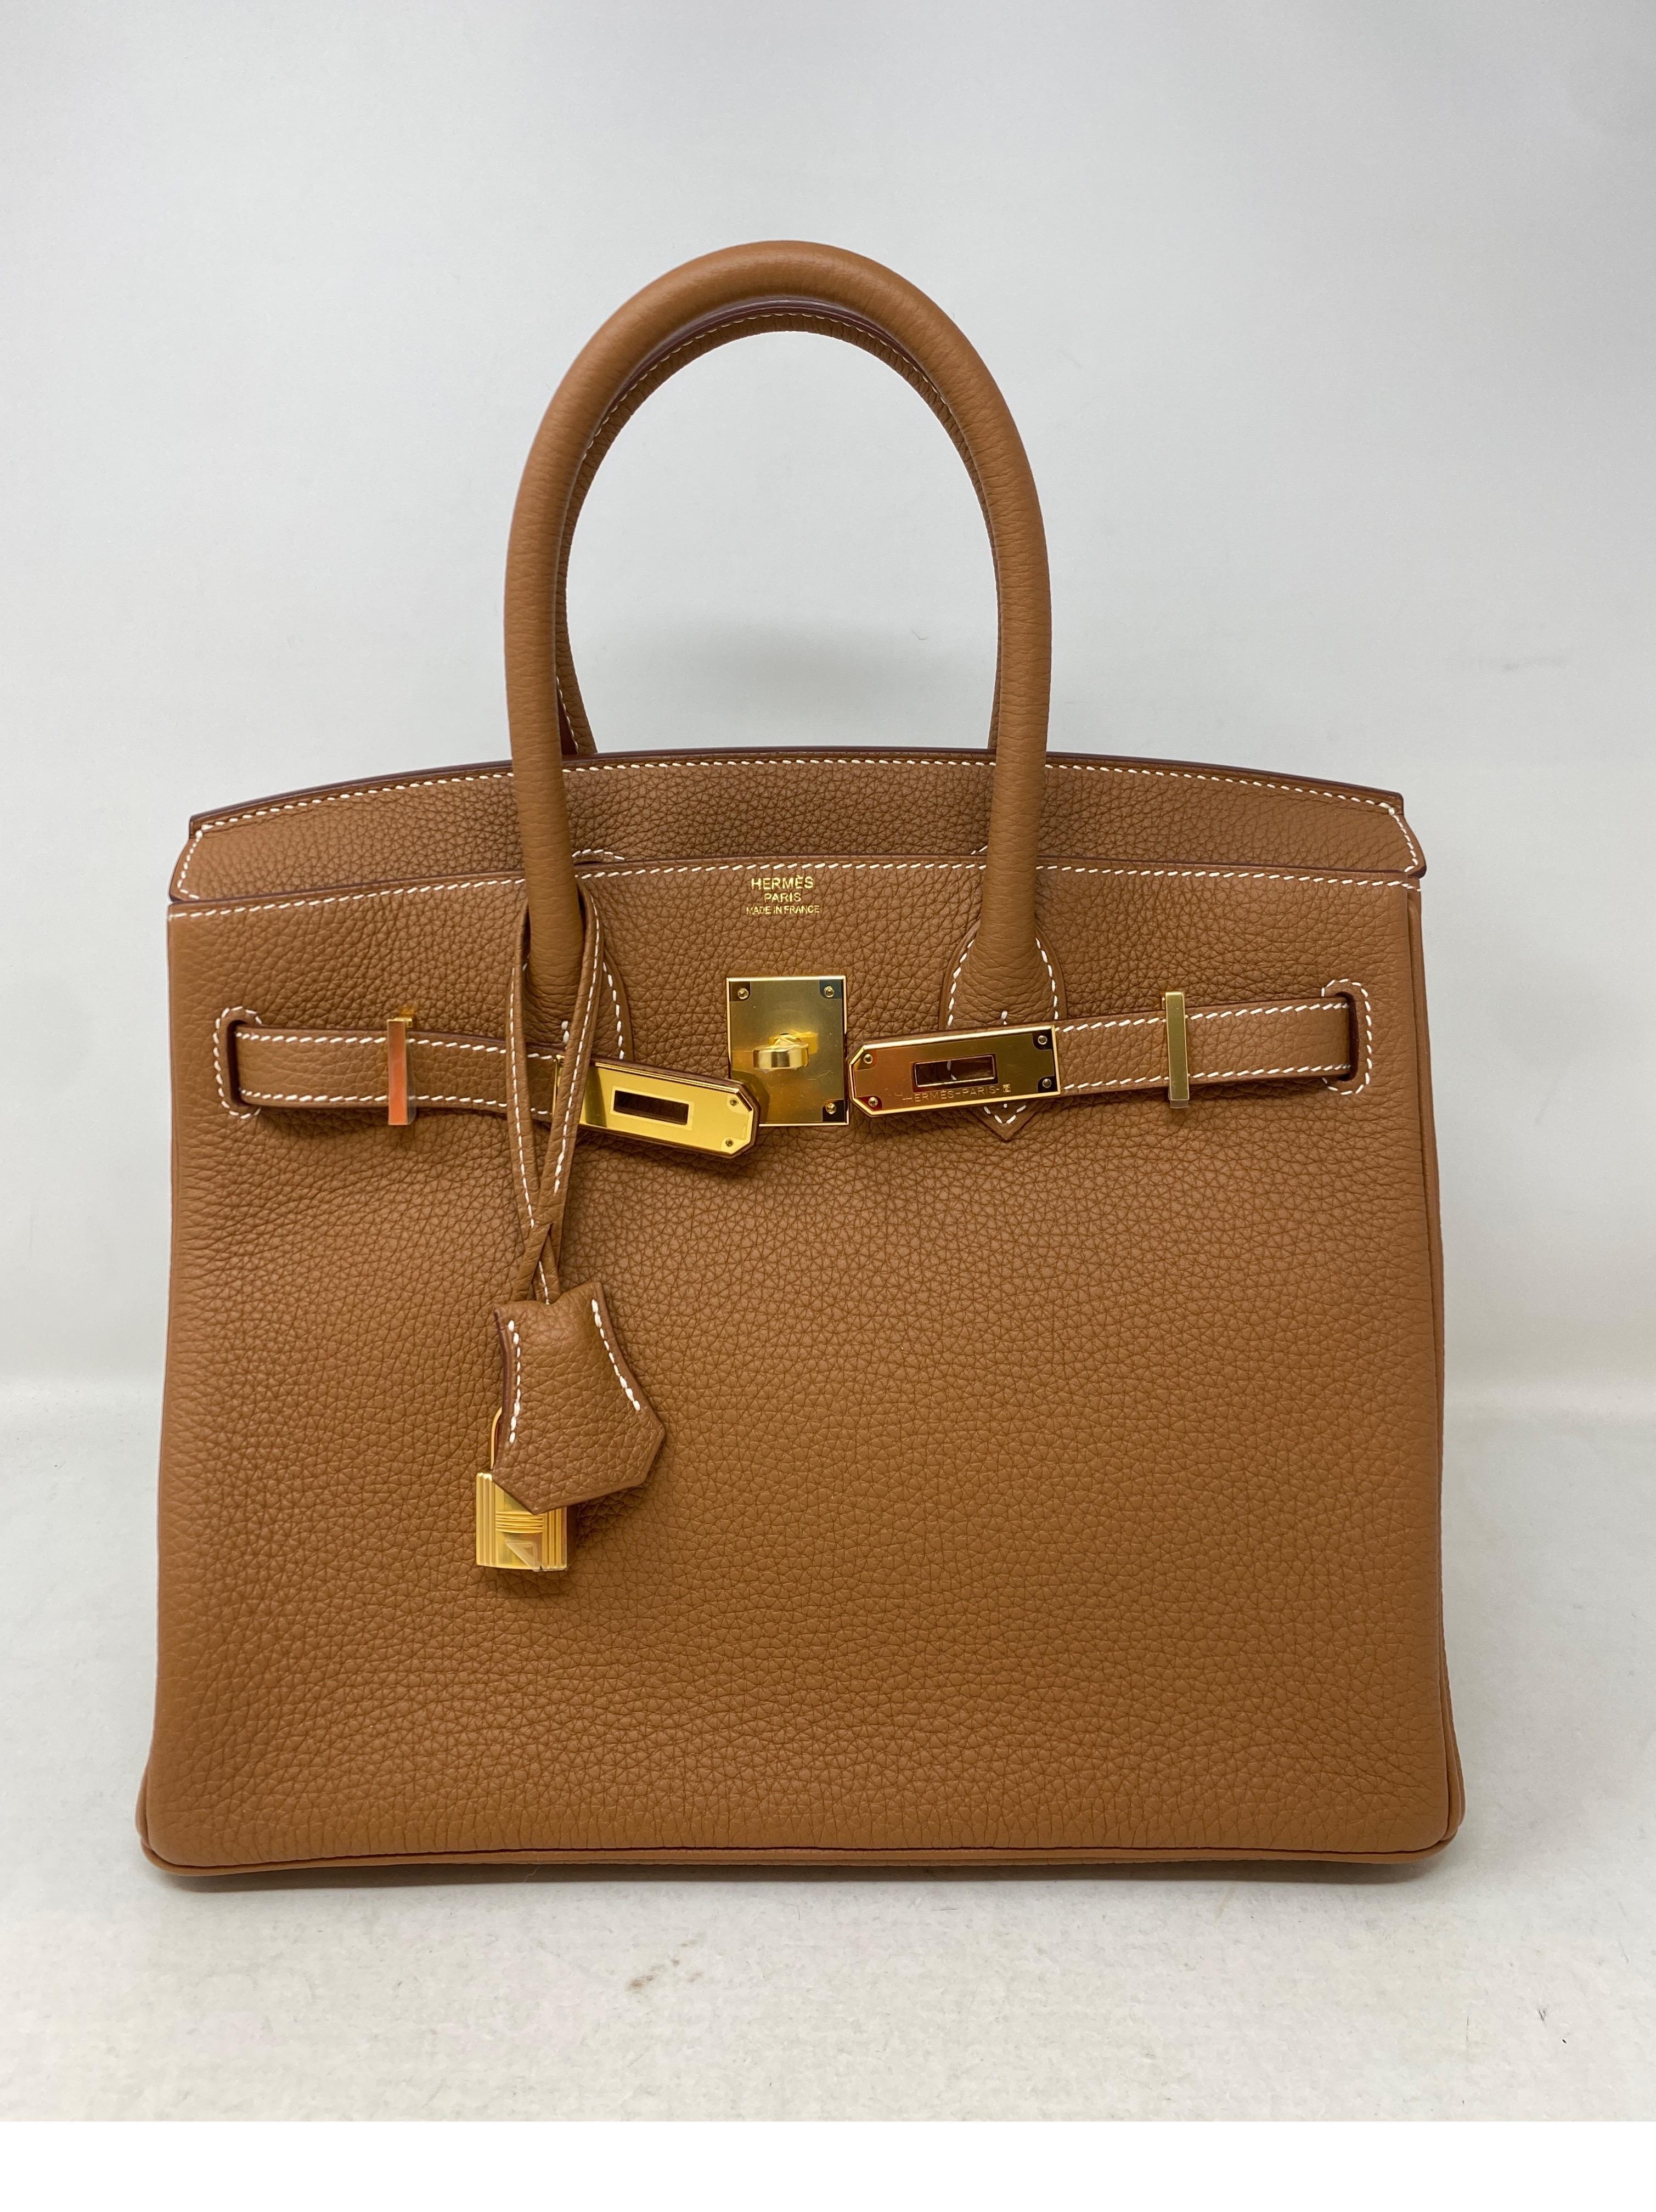 Hermes Gold Birkin 30 Bag. Gold hardware. New Birkin. Togo leather. Never used. Includes full set. Don't miss out on this one. The most wanted size and combination. Very gift worthy. Clochette, lock ,keys, and dust bag. Guaranteed authentic. 